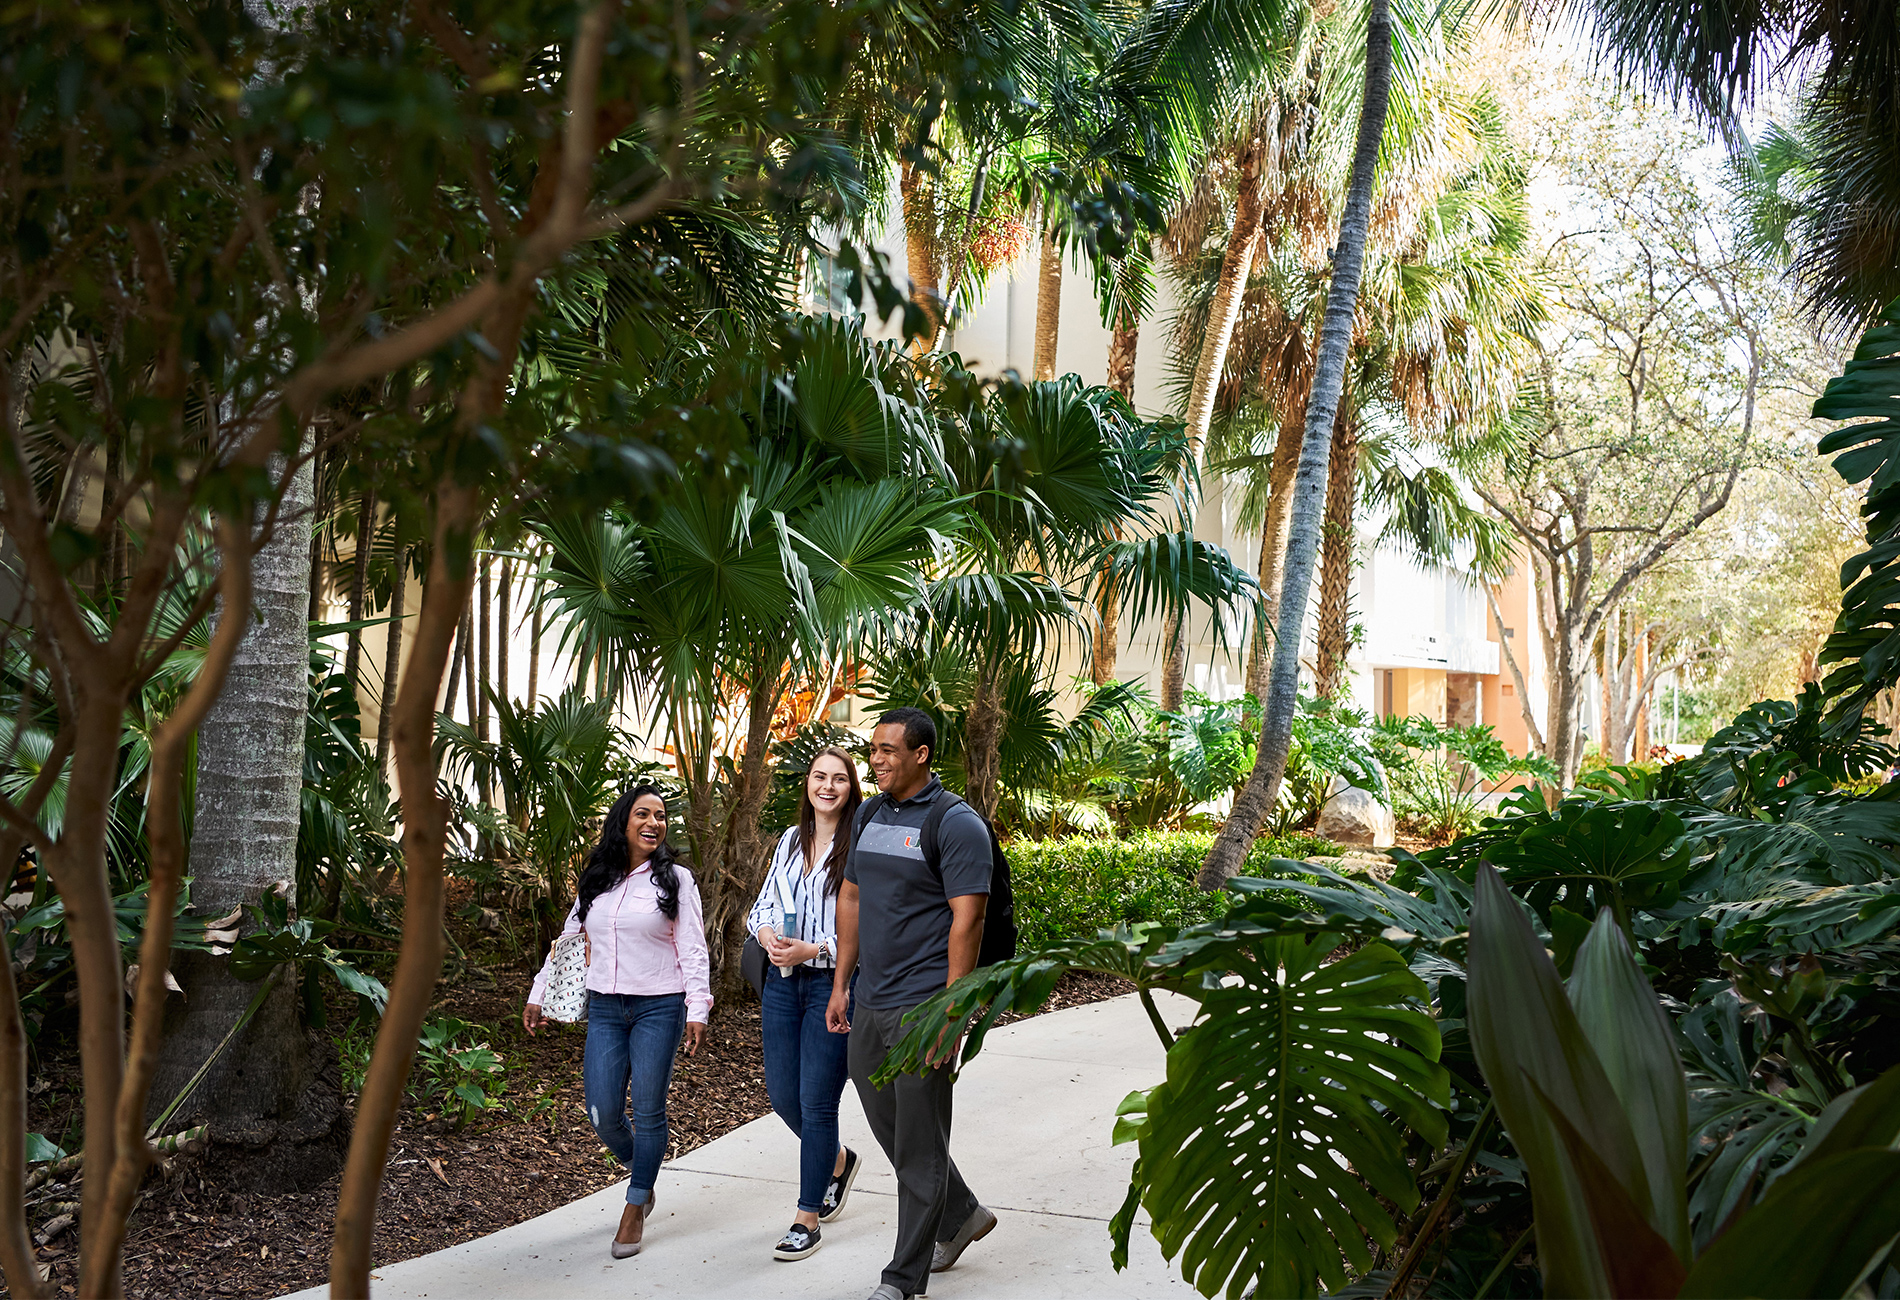 Students walking through campus. Student interaction on campus.